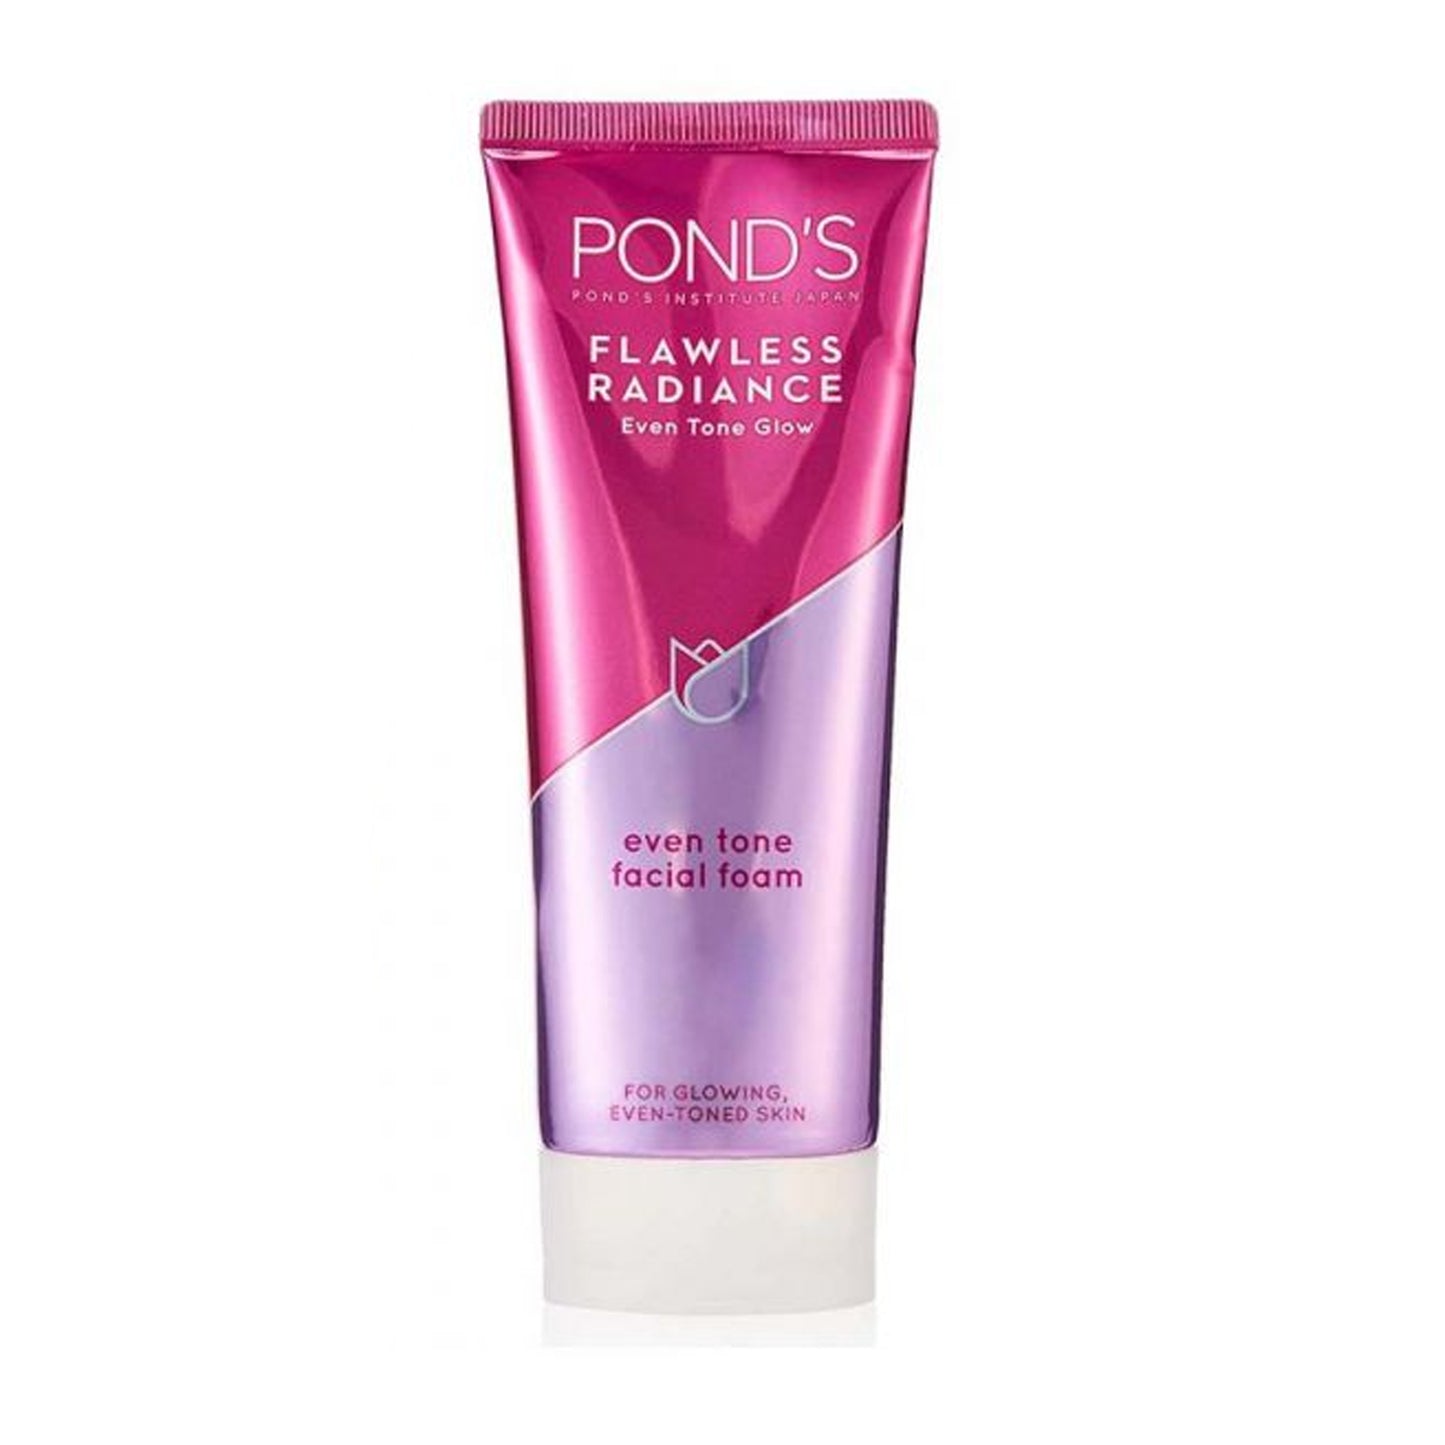 POND'S - FLAWLESS RADIANCE EVEN TONE GLOW EVEN TONE FACIAL FOAM - 100ML